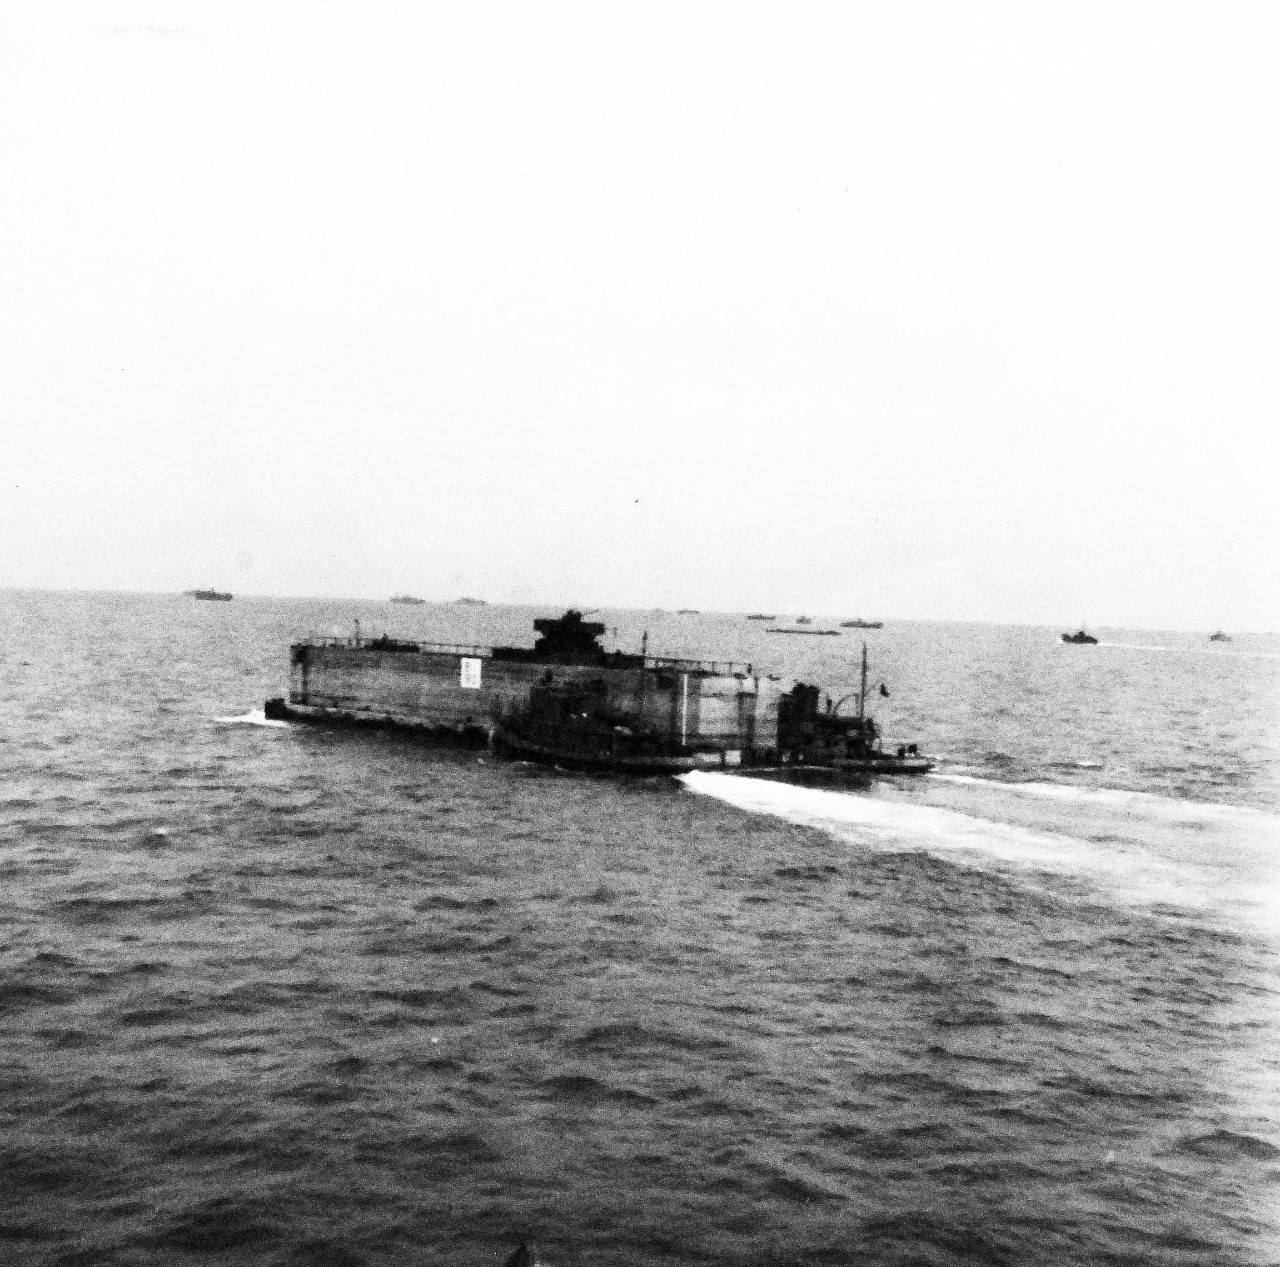 80-G-285191:  Normandy Invasion, Mulberries, June 1944.   The Phoenix or sectional concrete breakwater forming part of the U.S. Mulberry for man-made harbor off Omaha Beach, France, protecting landing craft from storms of English Channel.  Shown: The Phoenix being towed in to be sunk at the beach.  Photograph released November 7, 1944.  Official U.S. Navy photograph, now in the collections of the National Archives.  (2016/03/15).